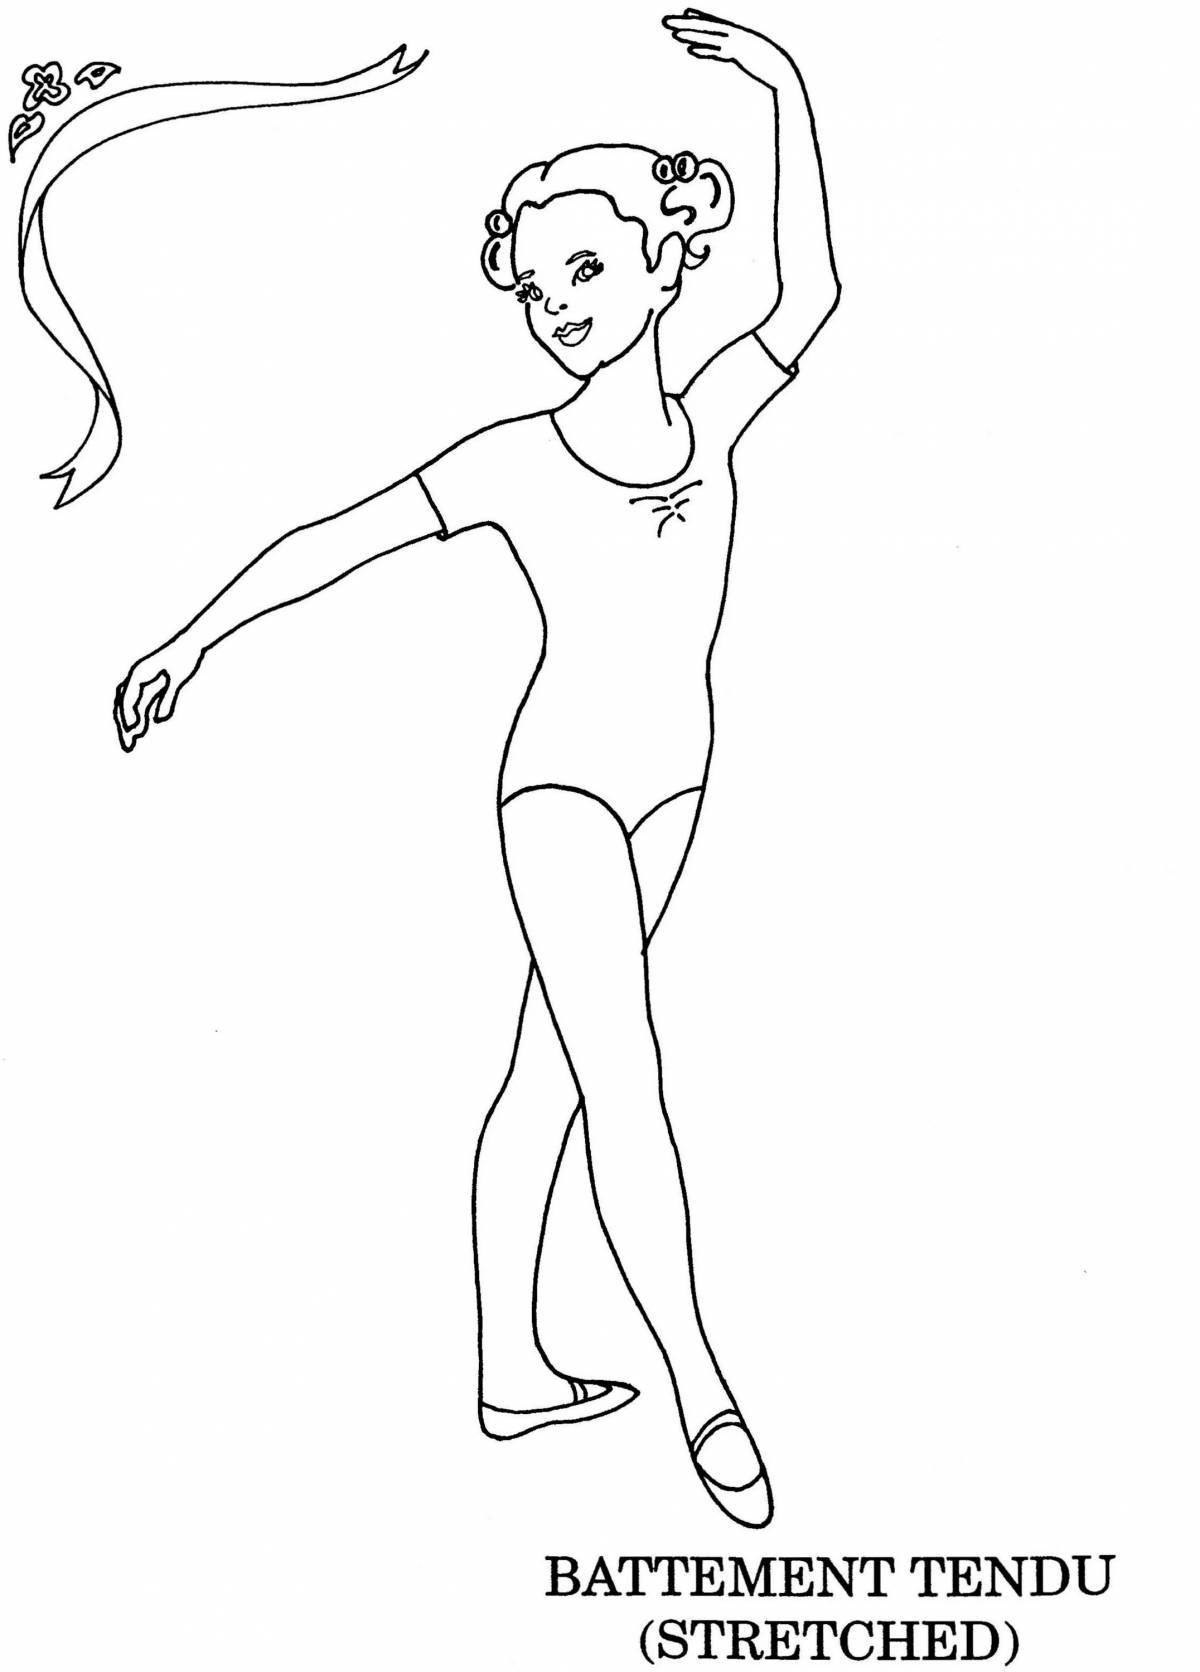 Wonderful gymnastics coloring pages for girls